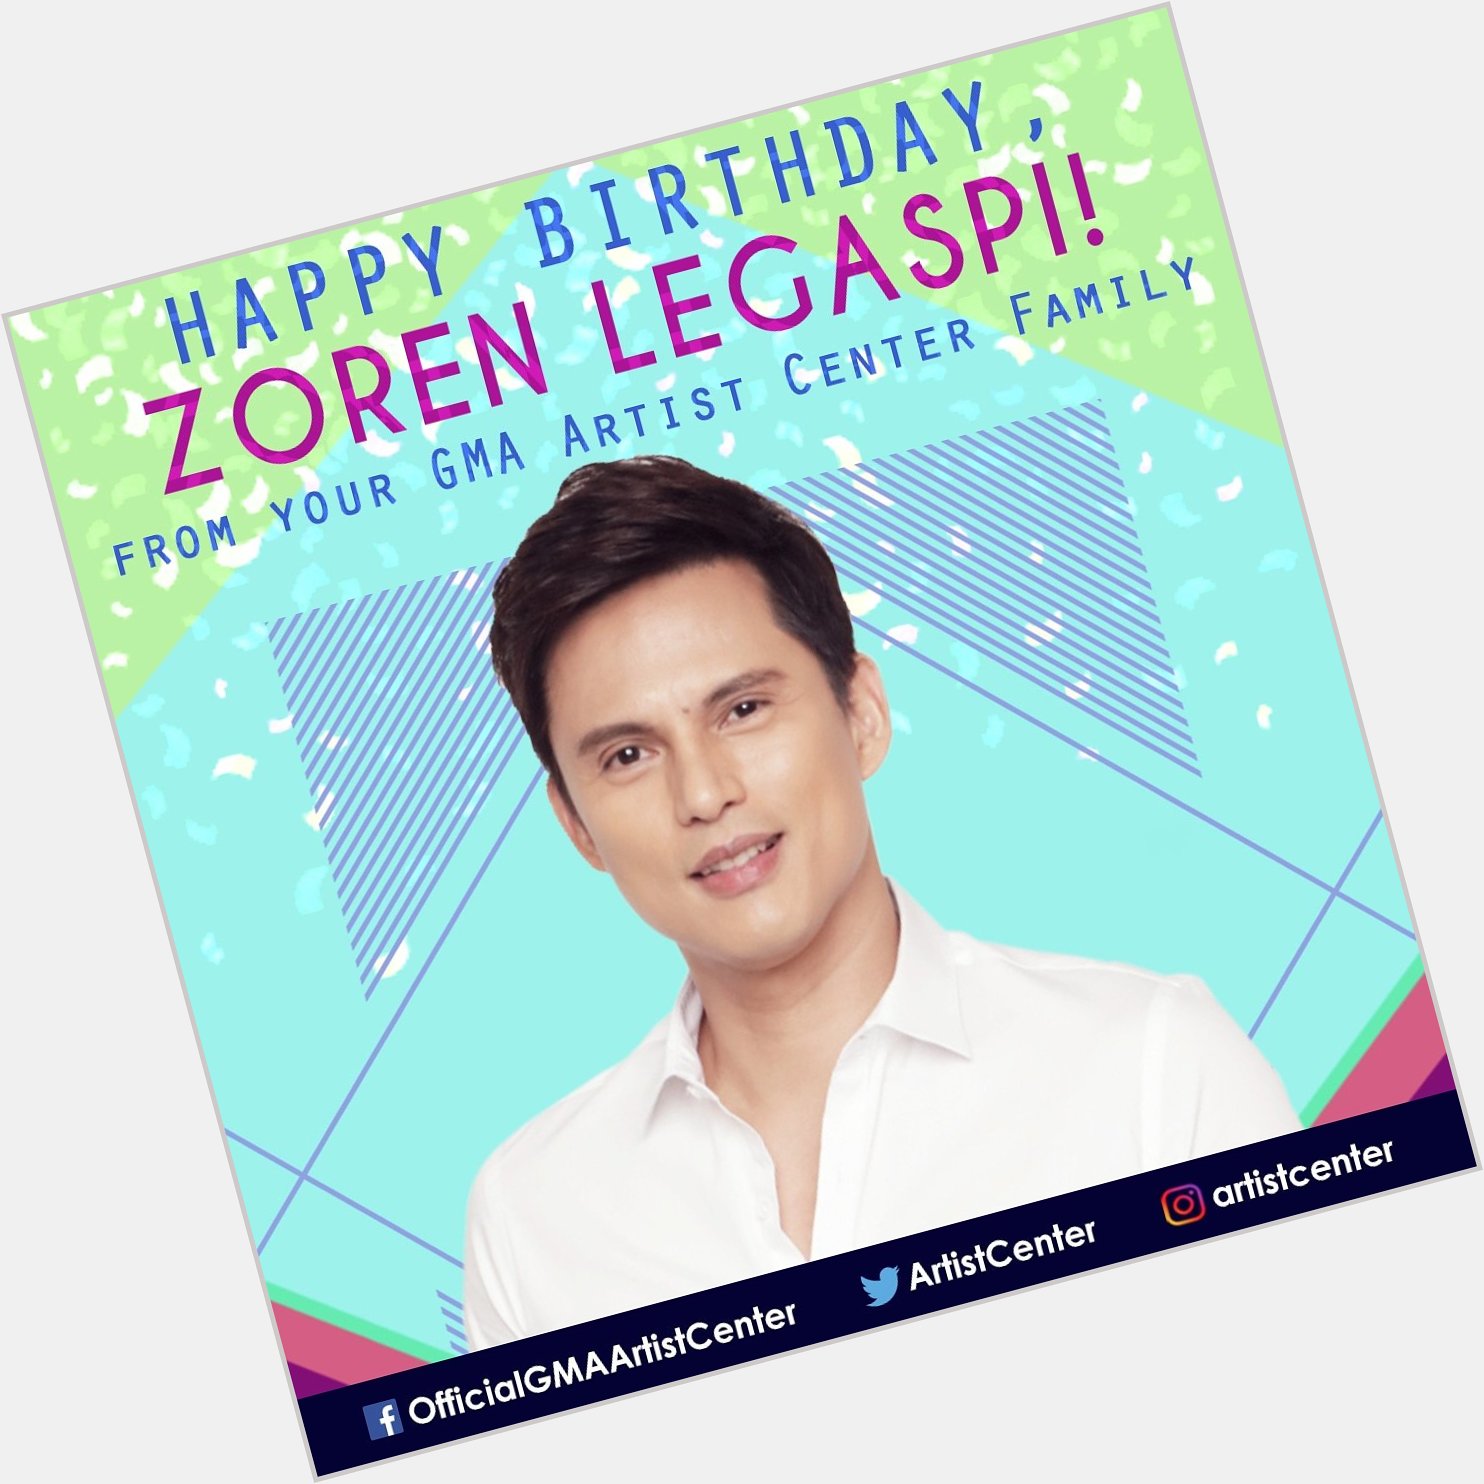 Happy Birthday, Zoren Legaspi! We hope all your birthday wishes come true!      